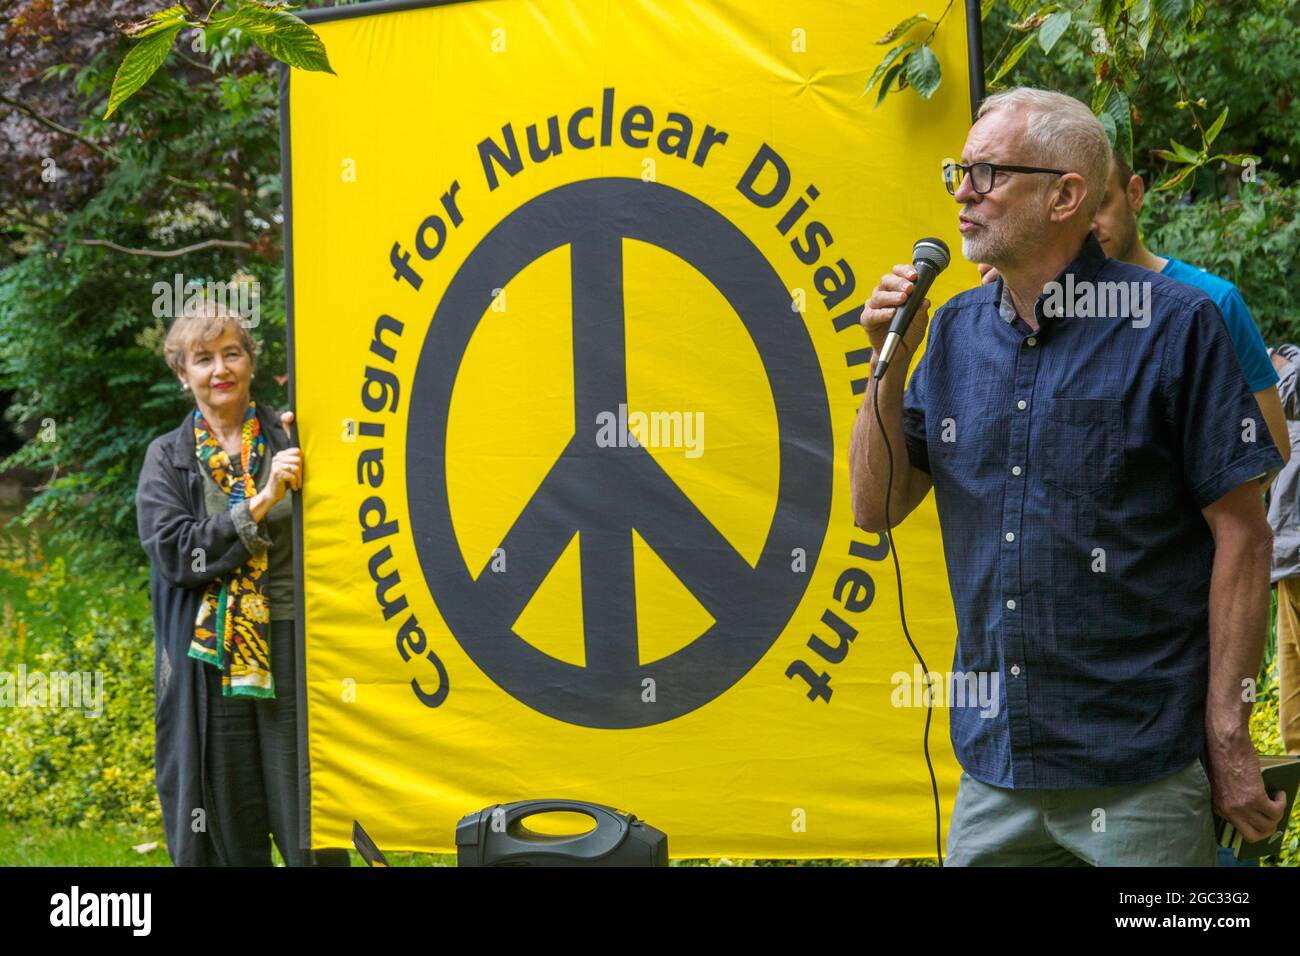 London, UK. 6th August 2021. Islington MP Jeremy Corbyn speaks. 76 years after atomic bombs were dropped on Hiroshima and Nagaski, London CND met at the Hiroshima Cherry tree in Tavistock Square to remember the many killed and survivors who are still suffering the event, and to celebrate the UN treaty prohibiting nuclear weapons which came into force this January. They called on the government to end the UK's nuclear weapon programme. Peter Marshall/Alamy Live News Stock Photo